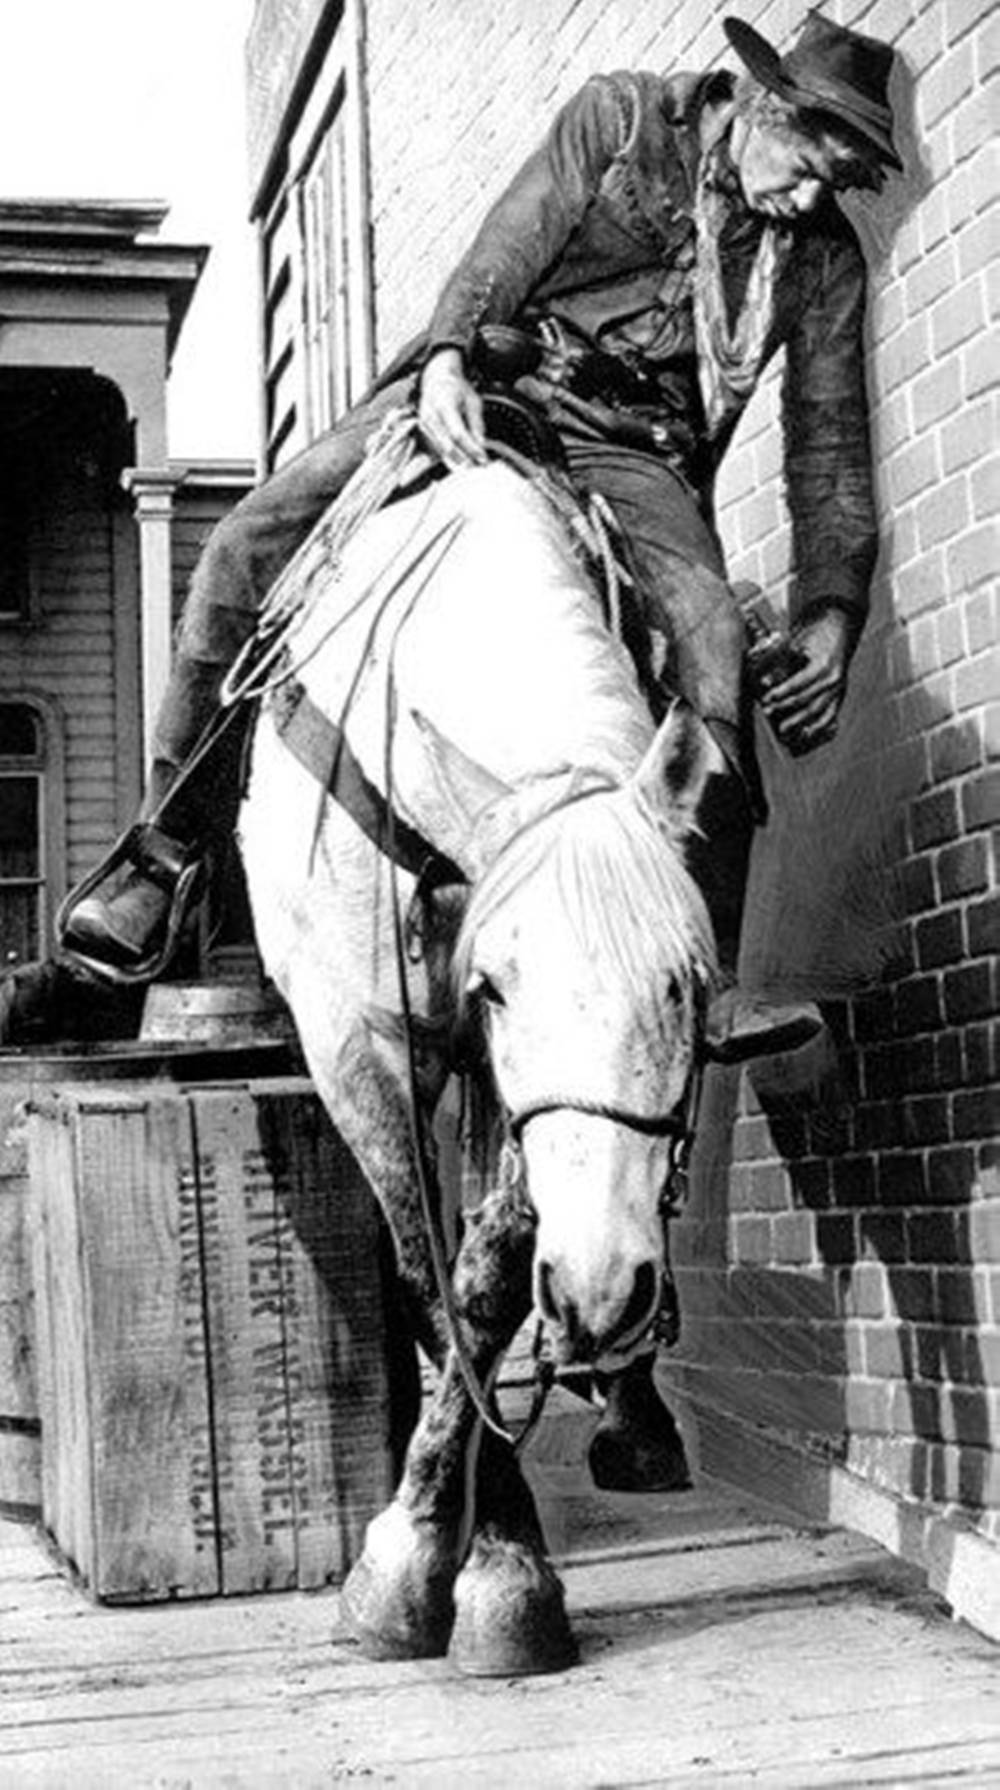 Lee Marvin Riding A Horse Wallpaper